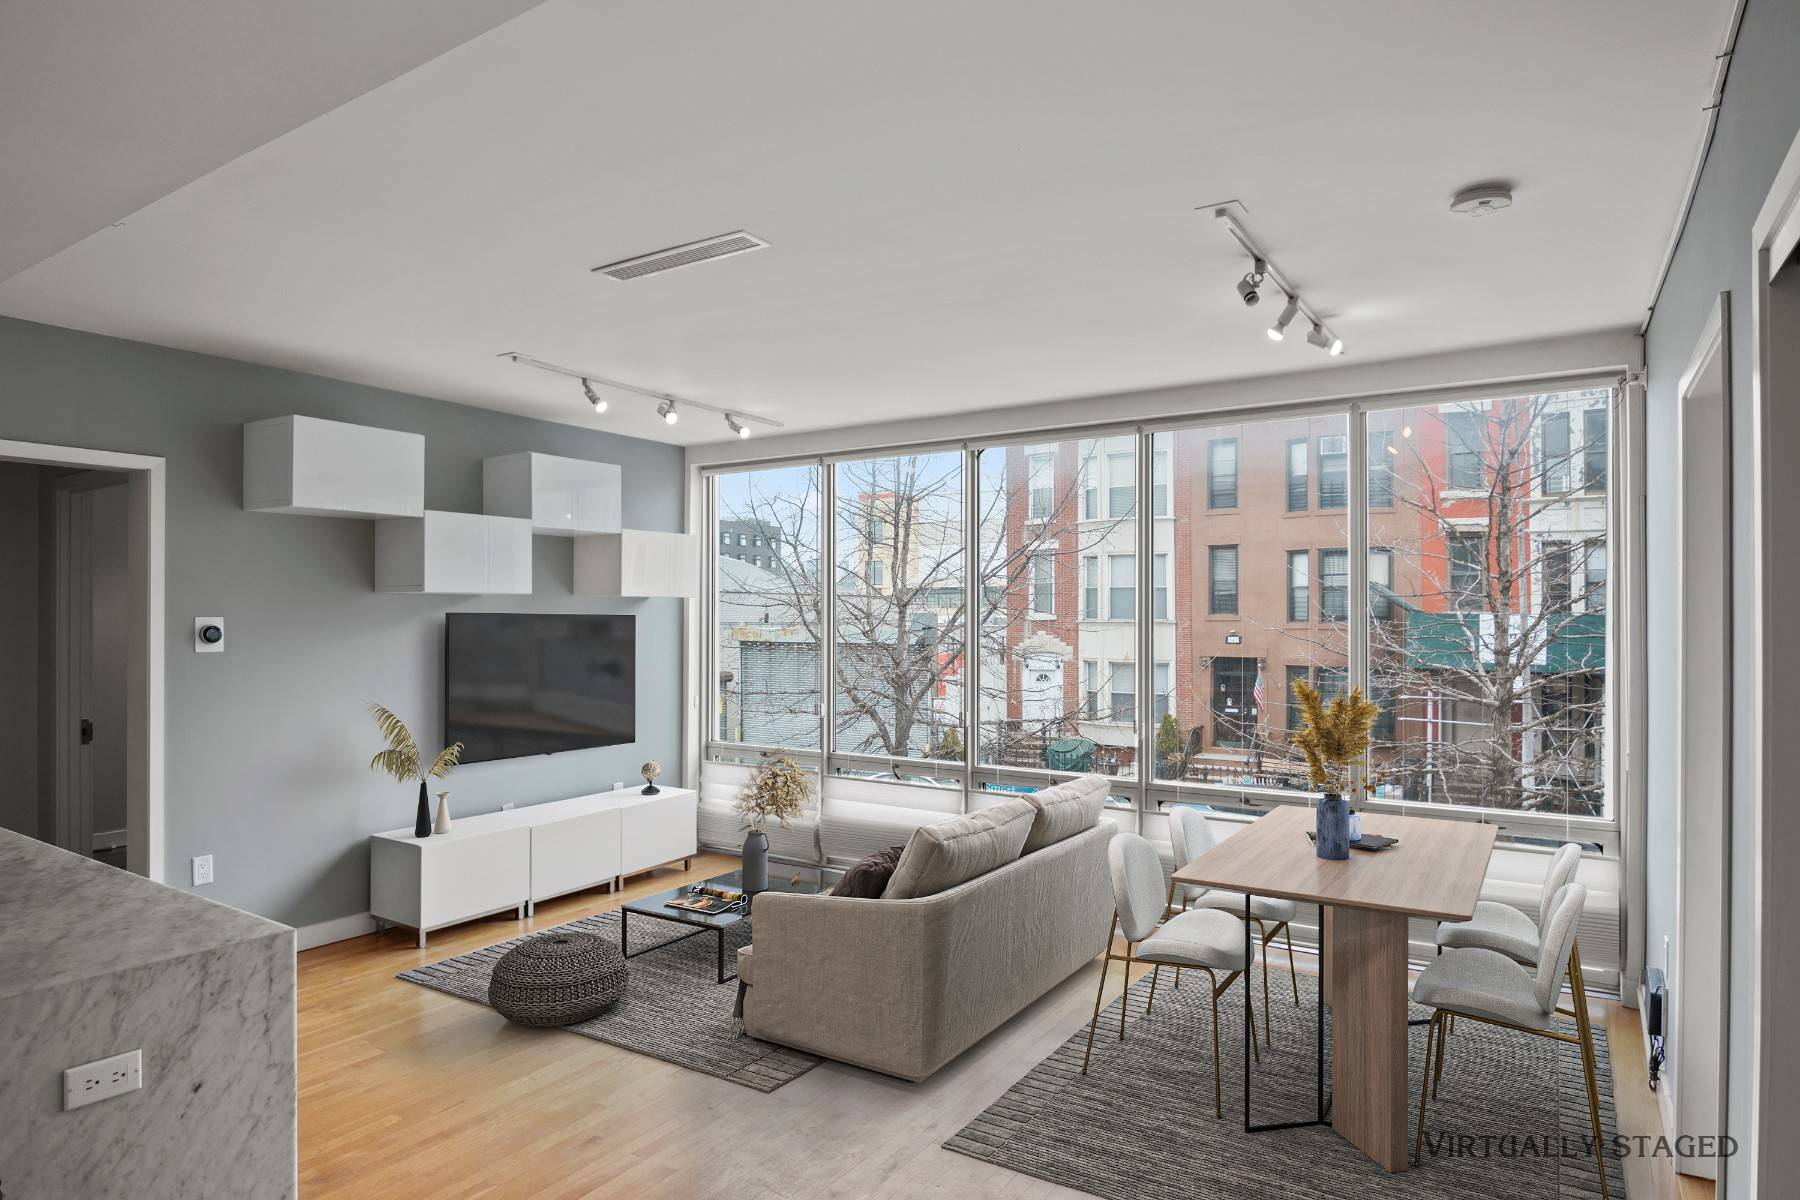 Get cozy in this bright, beautiful and spacious 2 bedroom condo located in a boutique elevator building at the crossroads of Park Slope and Gowanus.